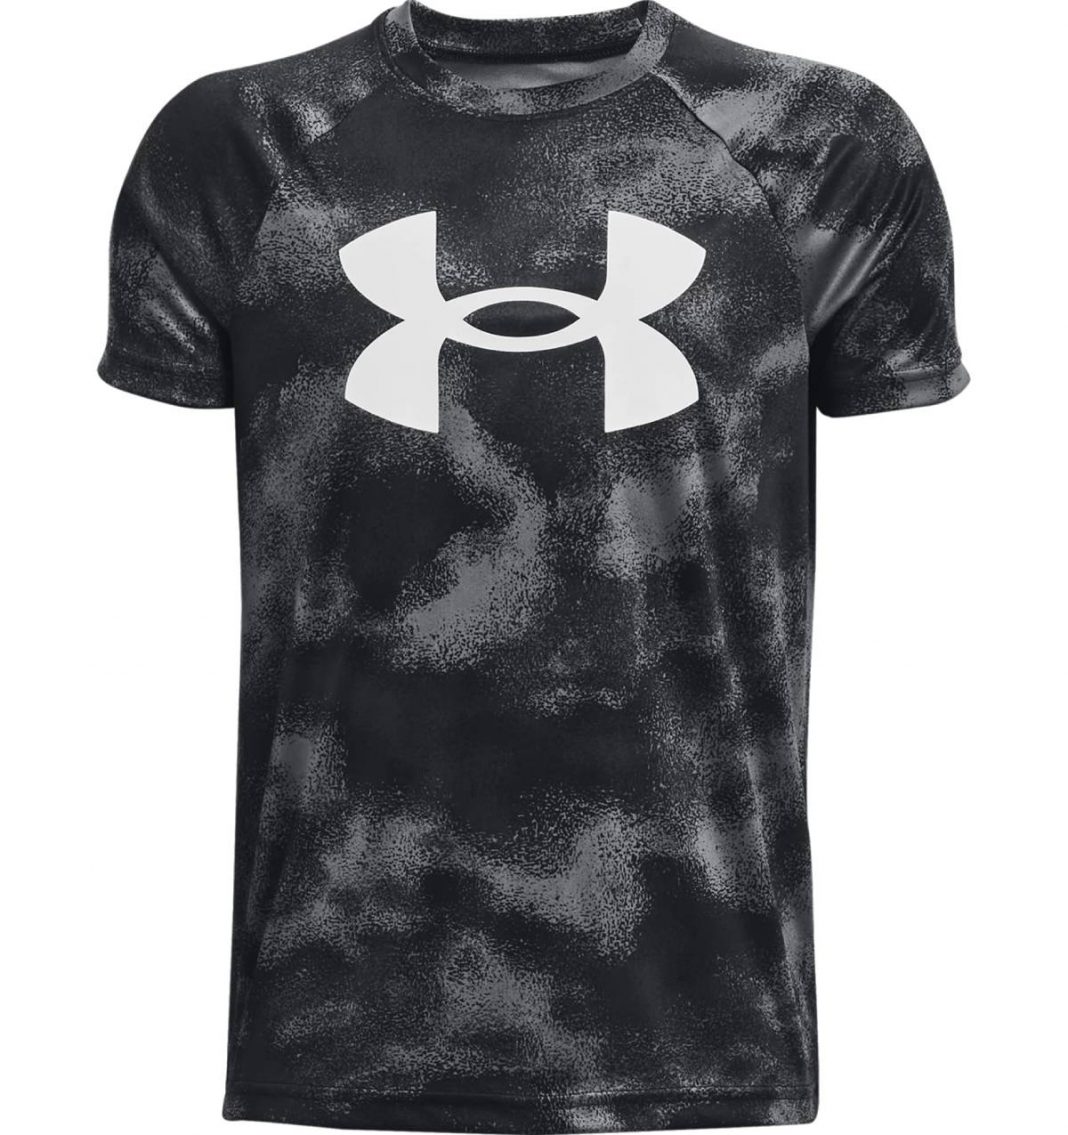 Under Armour Boys' Tech Big Logo Printed Short-Sleeve T-Shirt: A Winning Combination of Style and Performance